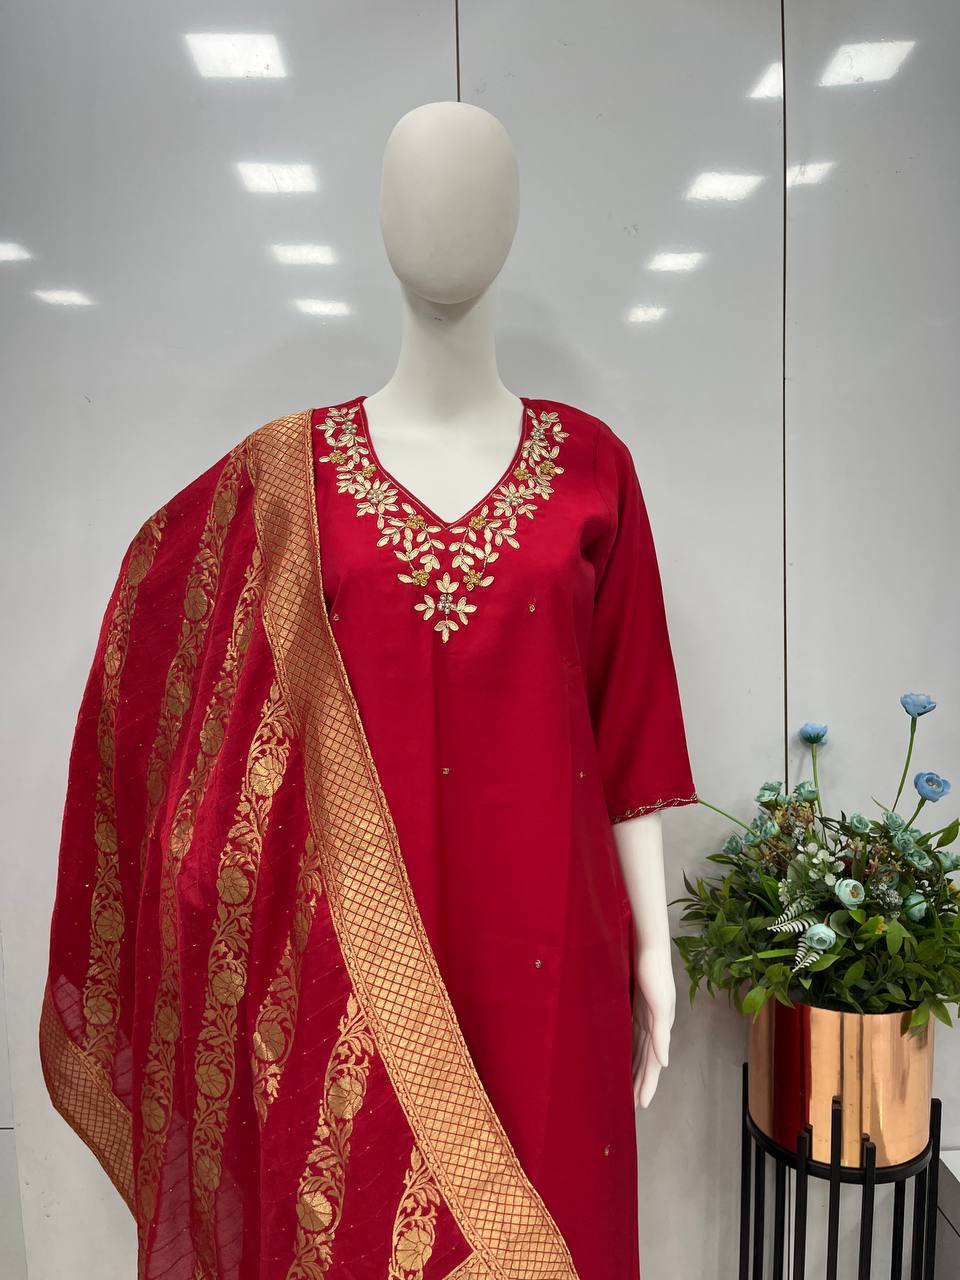 "Radiant Red Modal Viscose Silk Kurta Pant Set with Sequin Dupatta - Handwork Detailing, Fully Stitched - Sizes M to XXL"